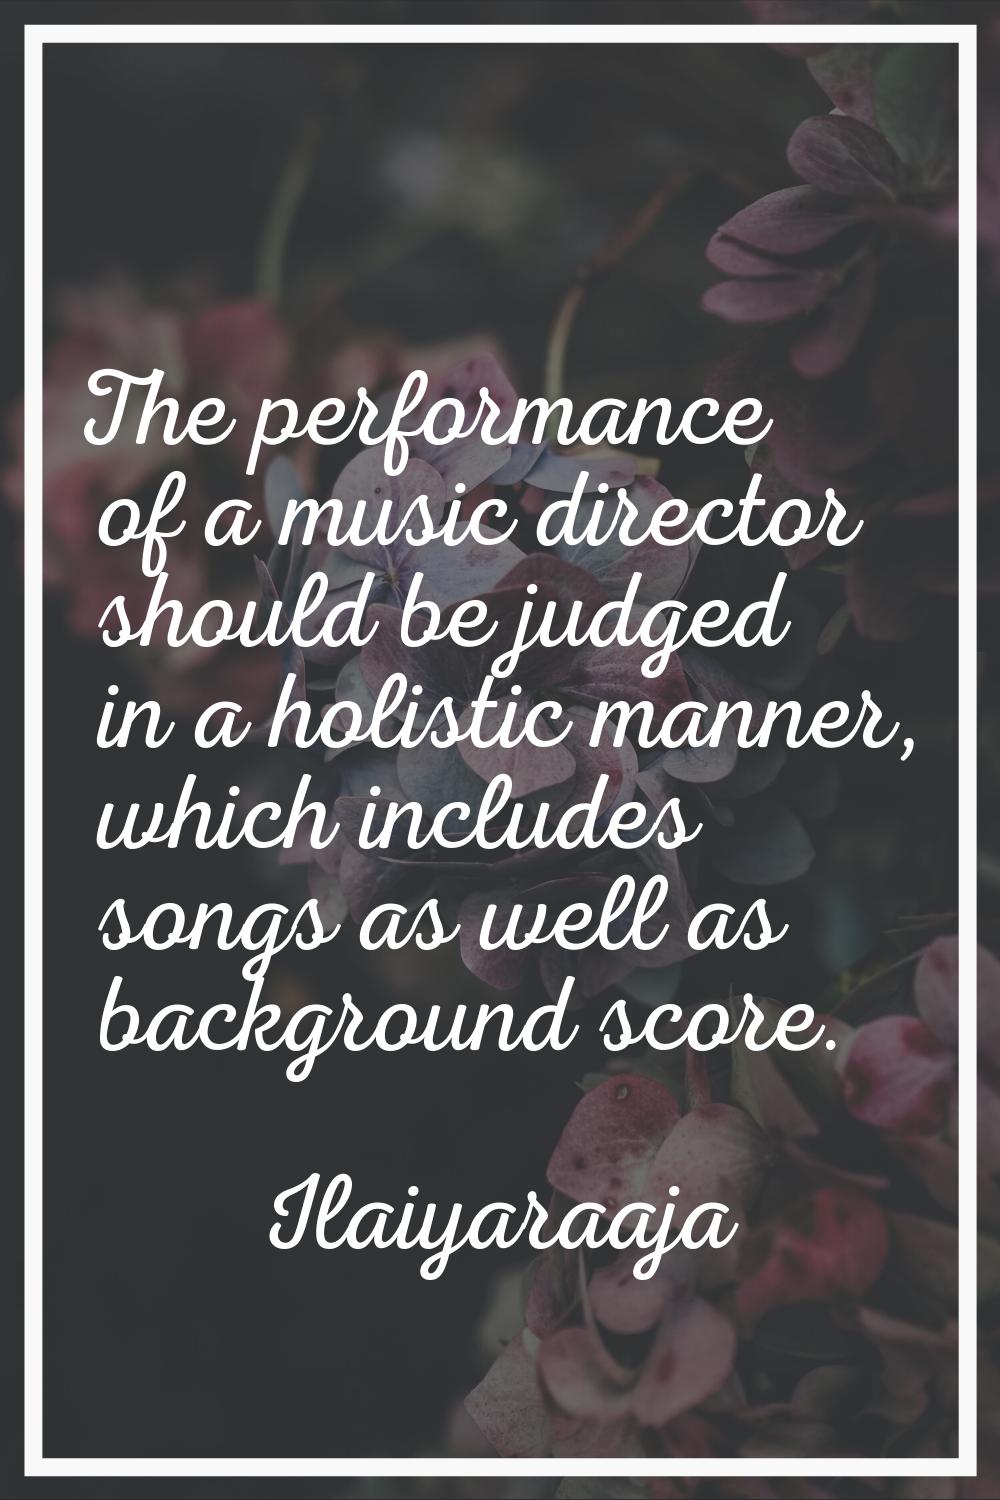 The performance of a music director should be judged in a holistic manner, which includes songs as 